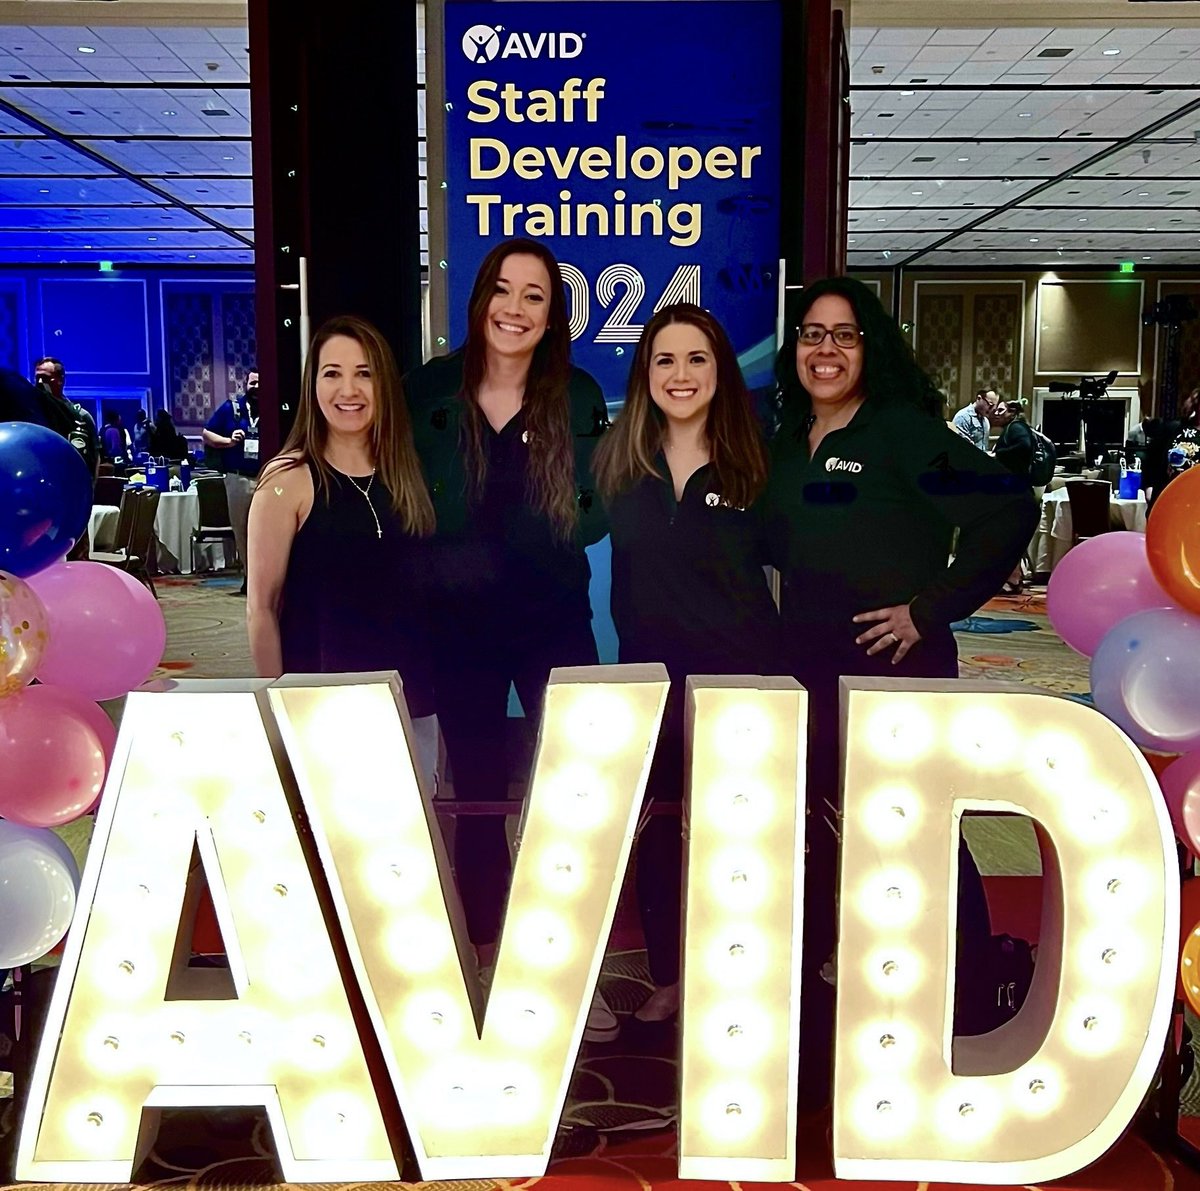 The professional learning @AVID4College Summer Institute is some of the best I ever experienced as an educator. We are fortunate to have 4 AVID Staff Developers in @AustinISD who continue to hone their craft and bring that learning back and serving the district!